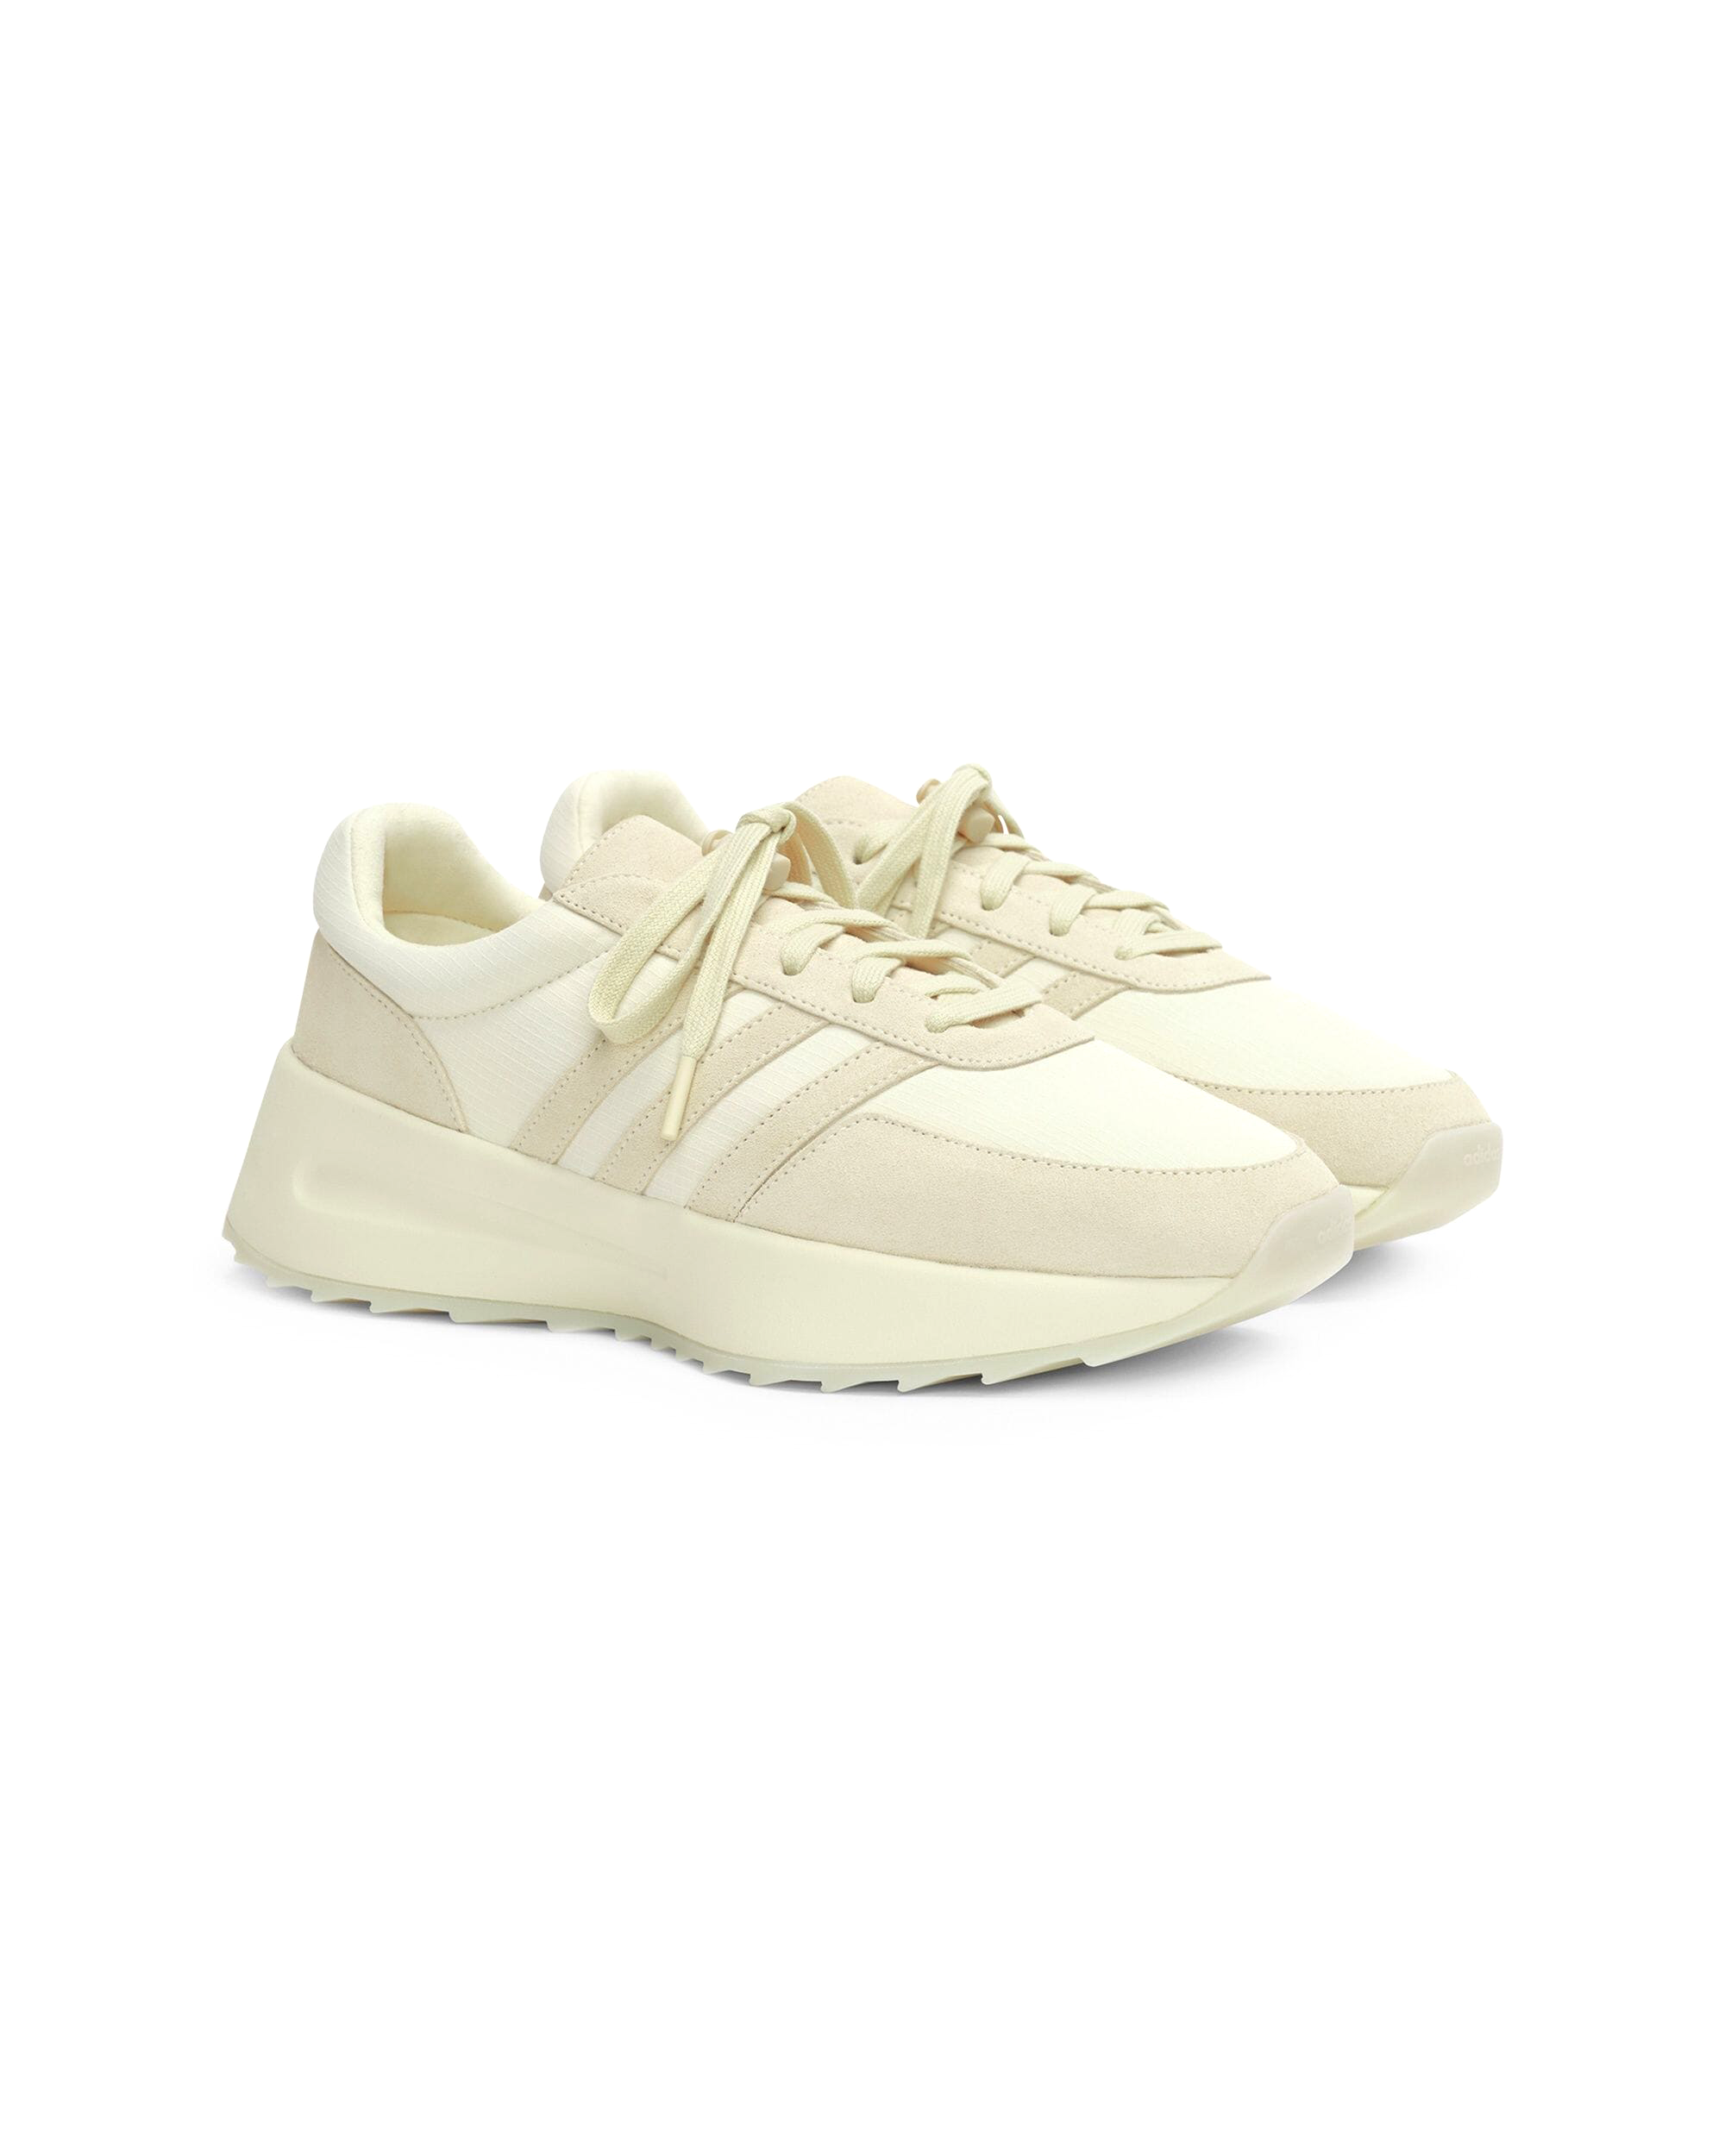 Fear of God Athletics Los Angeles - Pale Yellow / Pale Yellow